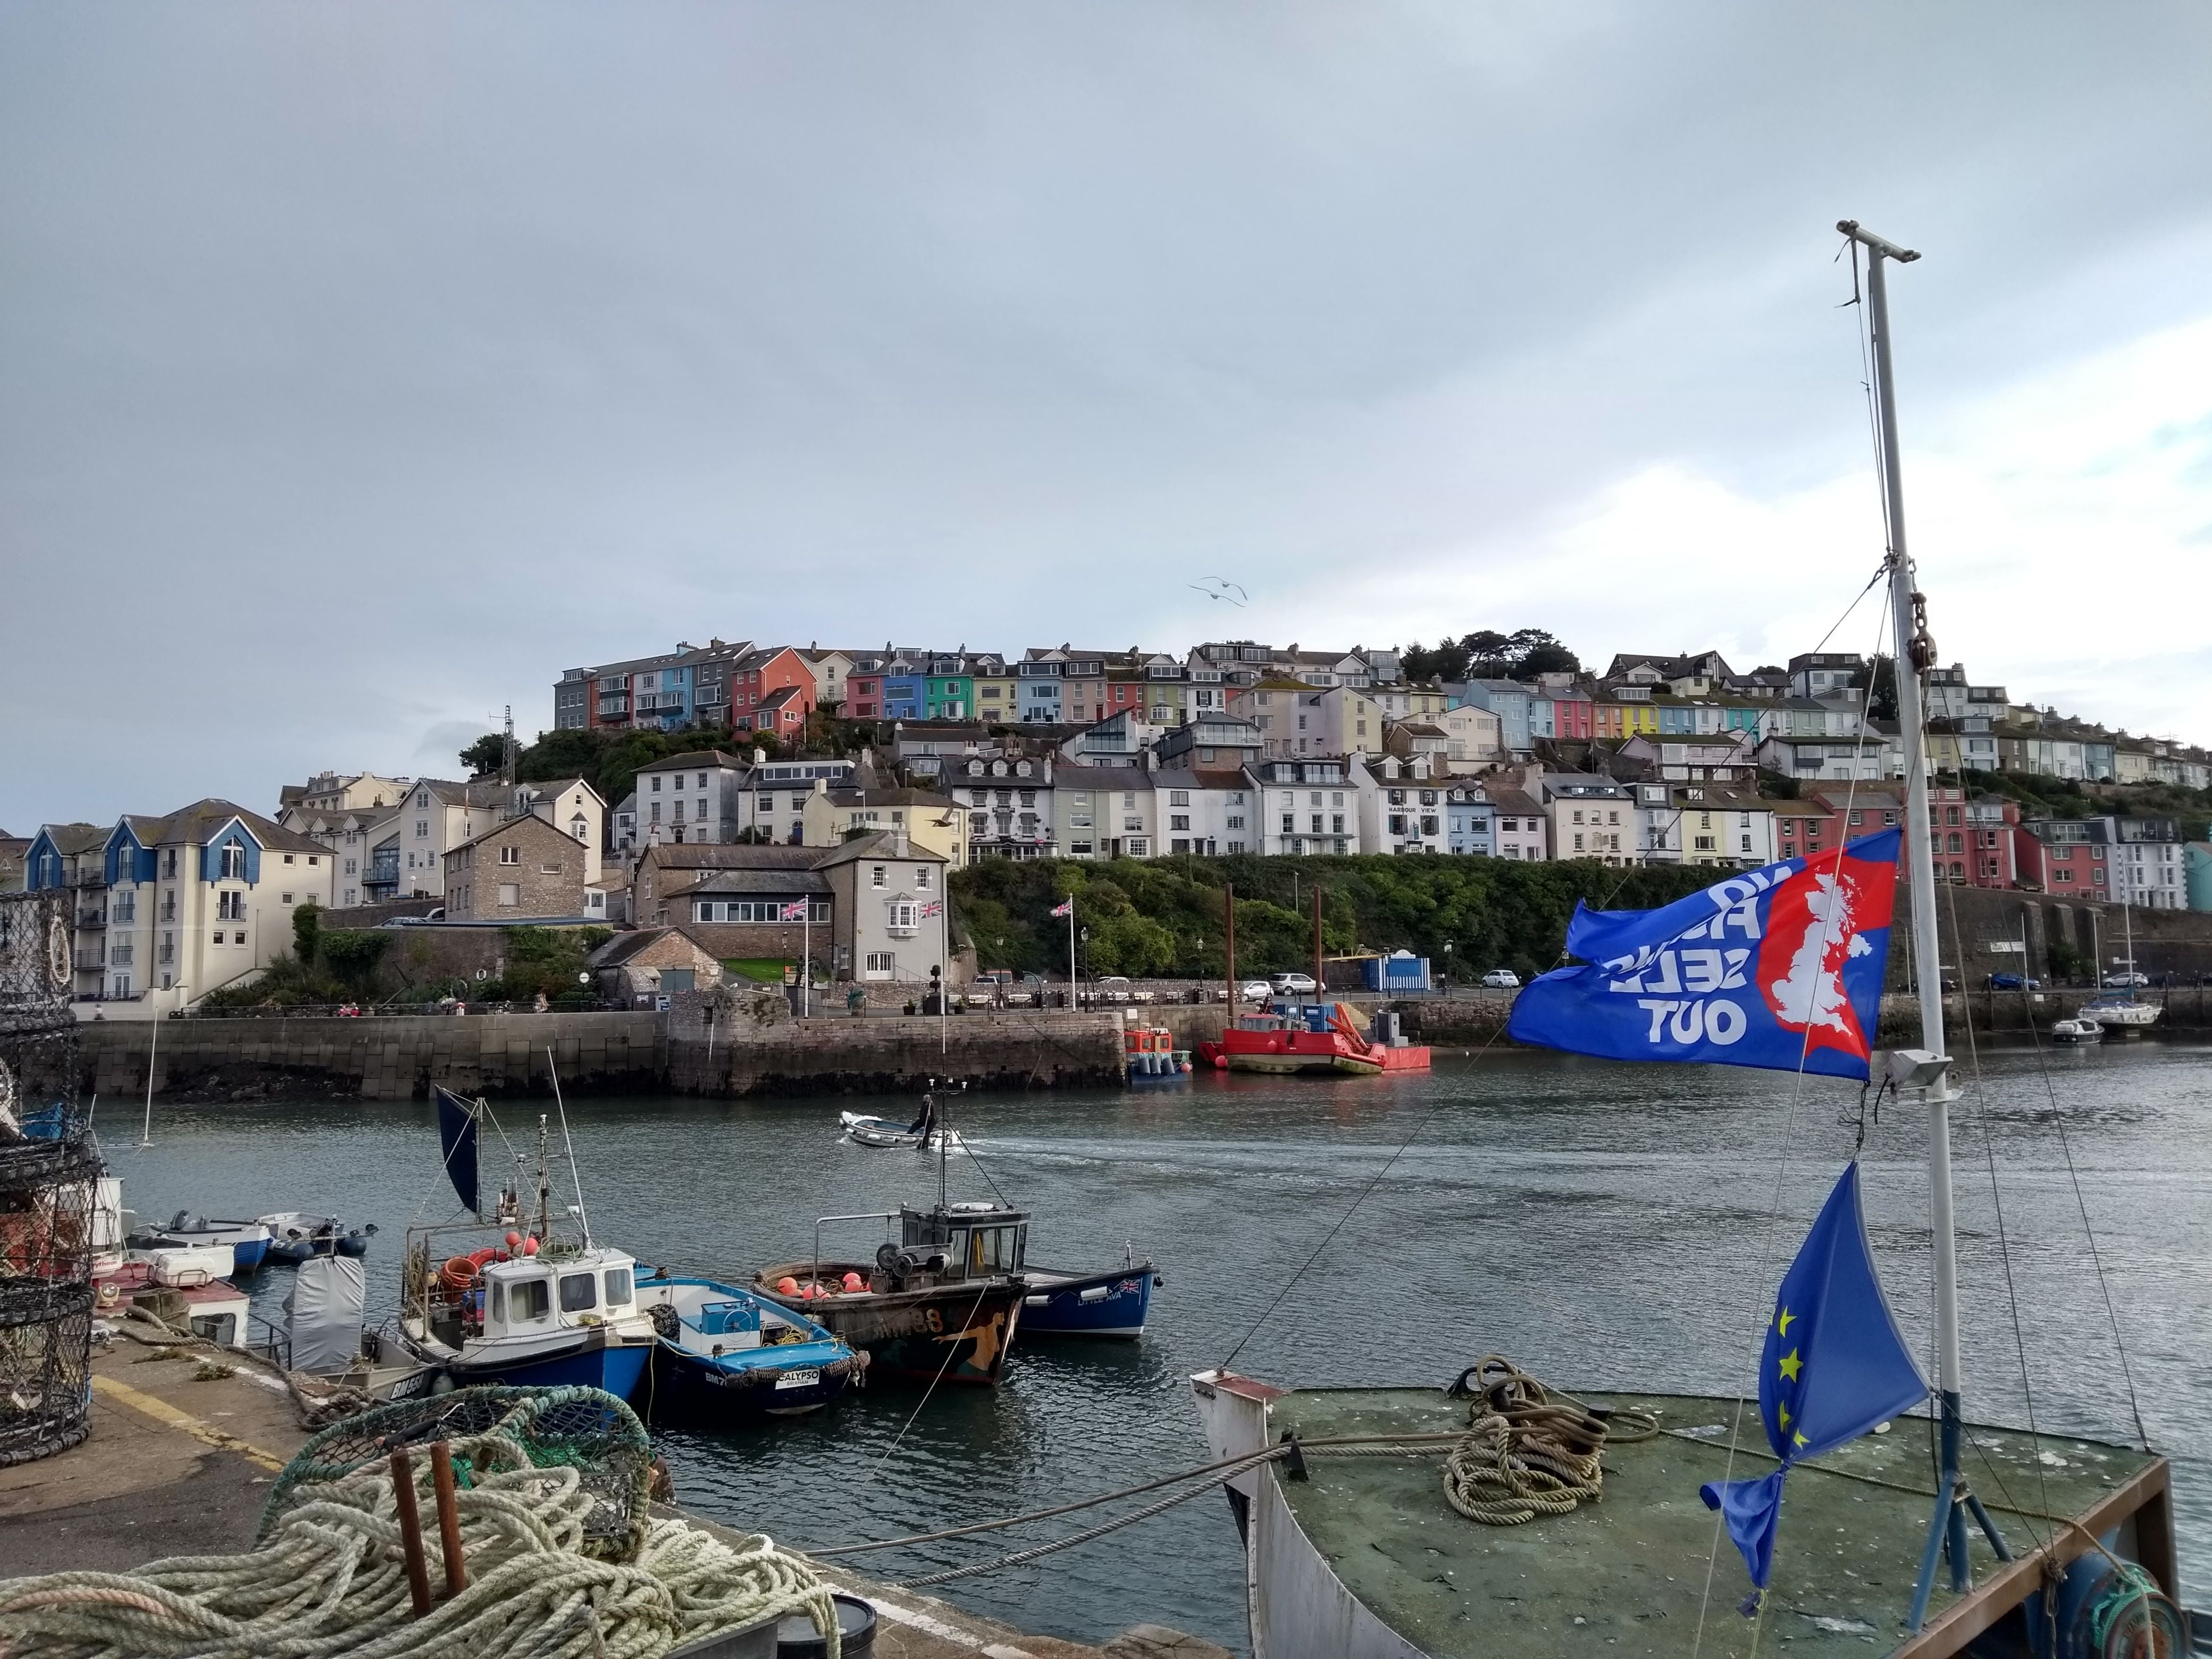 Around 17,000 people live in Brixham which is a busy fishing port and a popular holiday spot